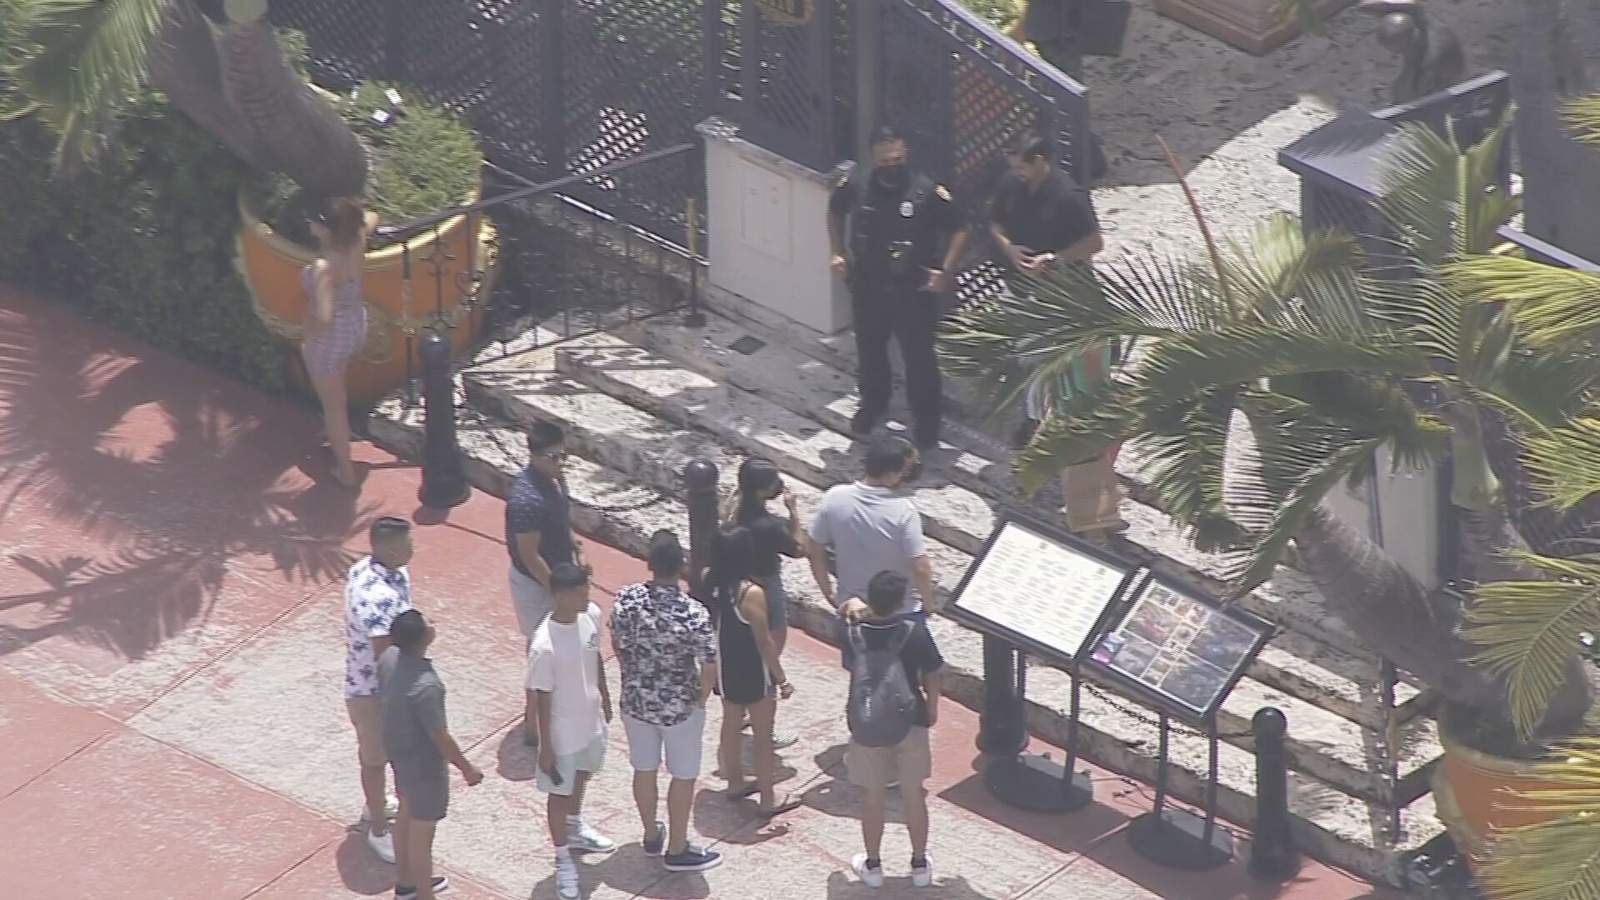 Sky 10 over Versace mansion shooting.